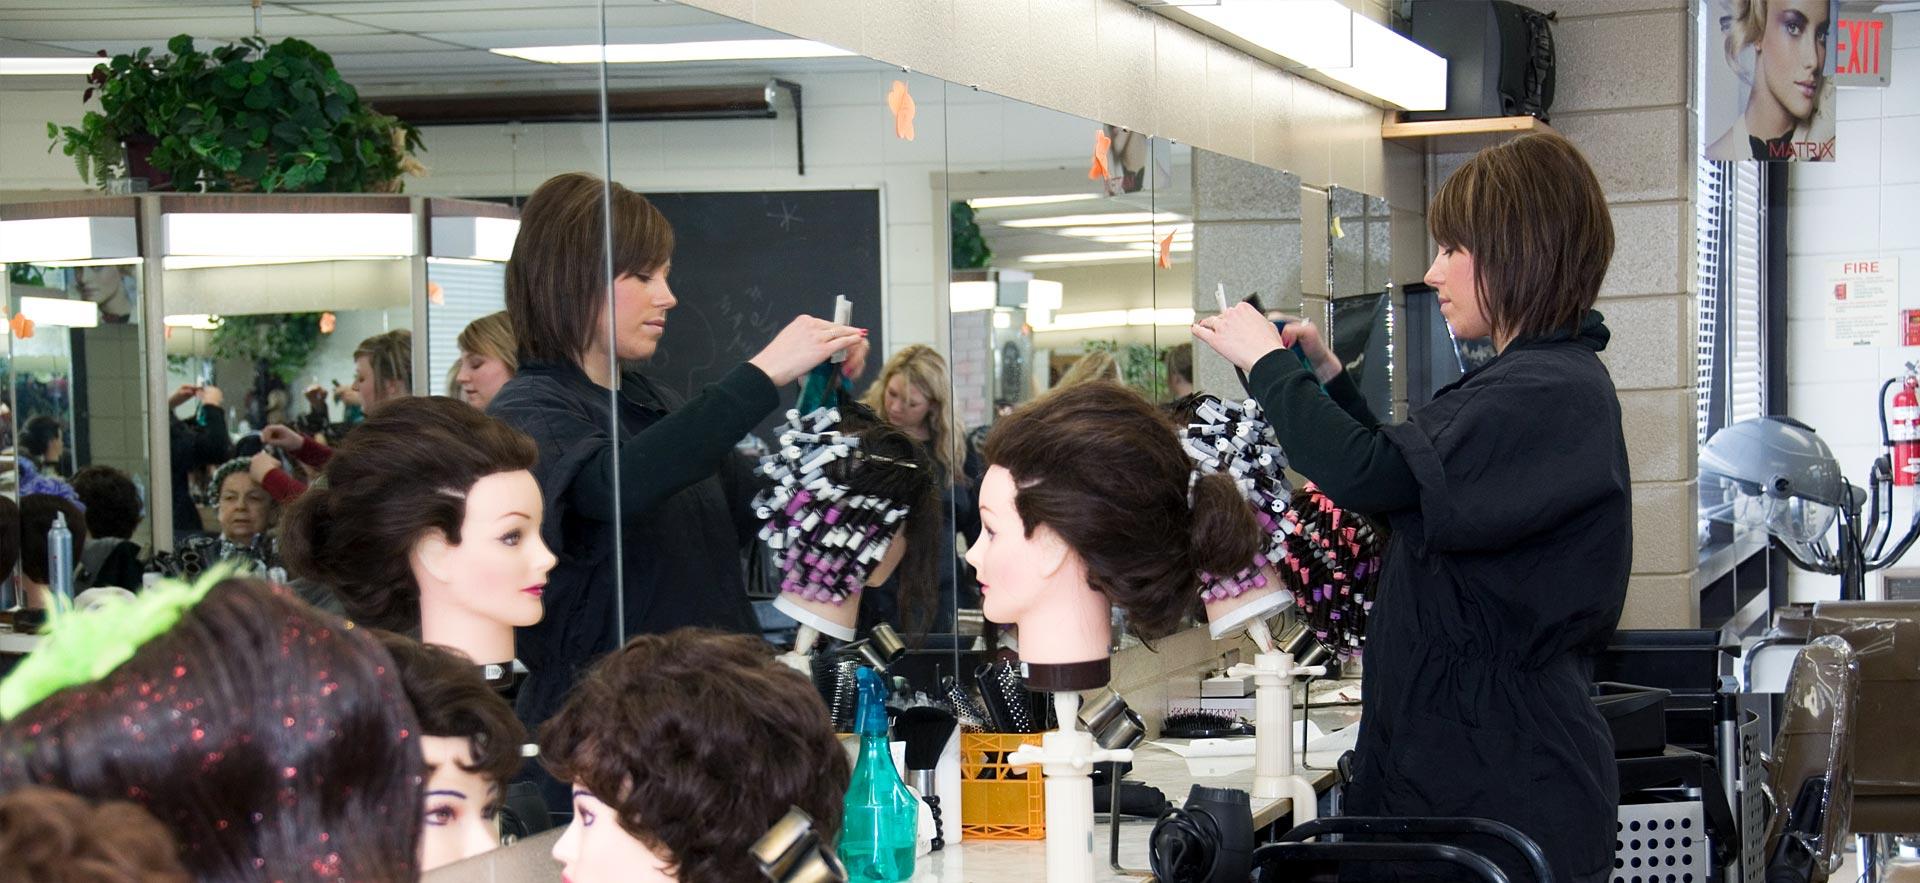 One female hairstylist student practices on a wig in front of a mirror. 